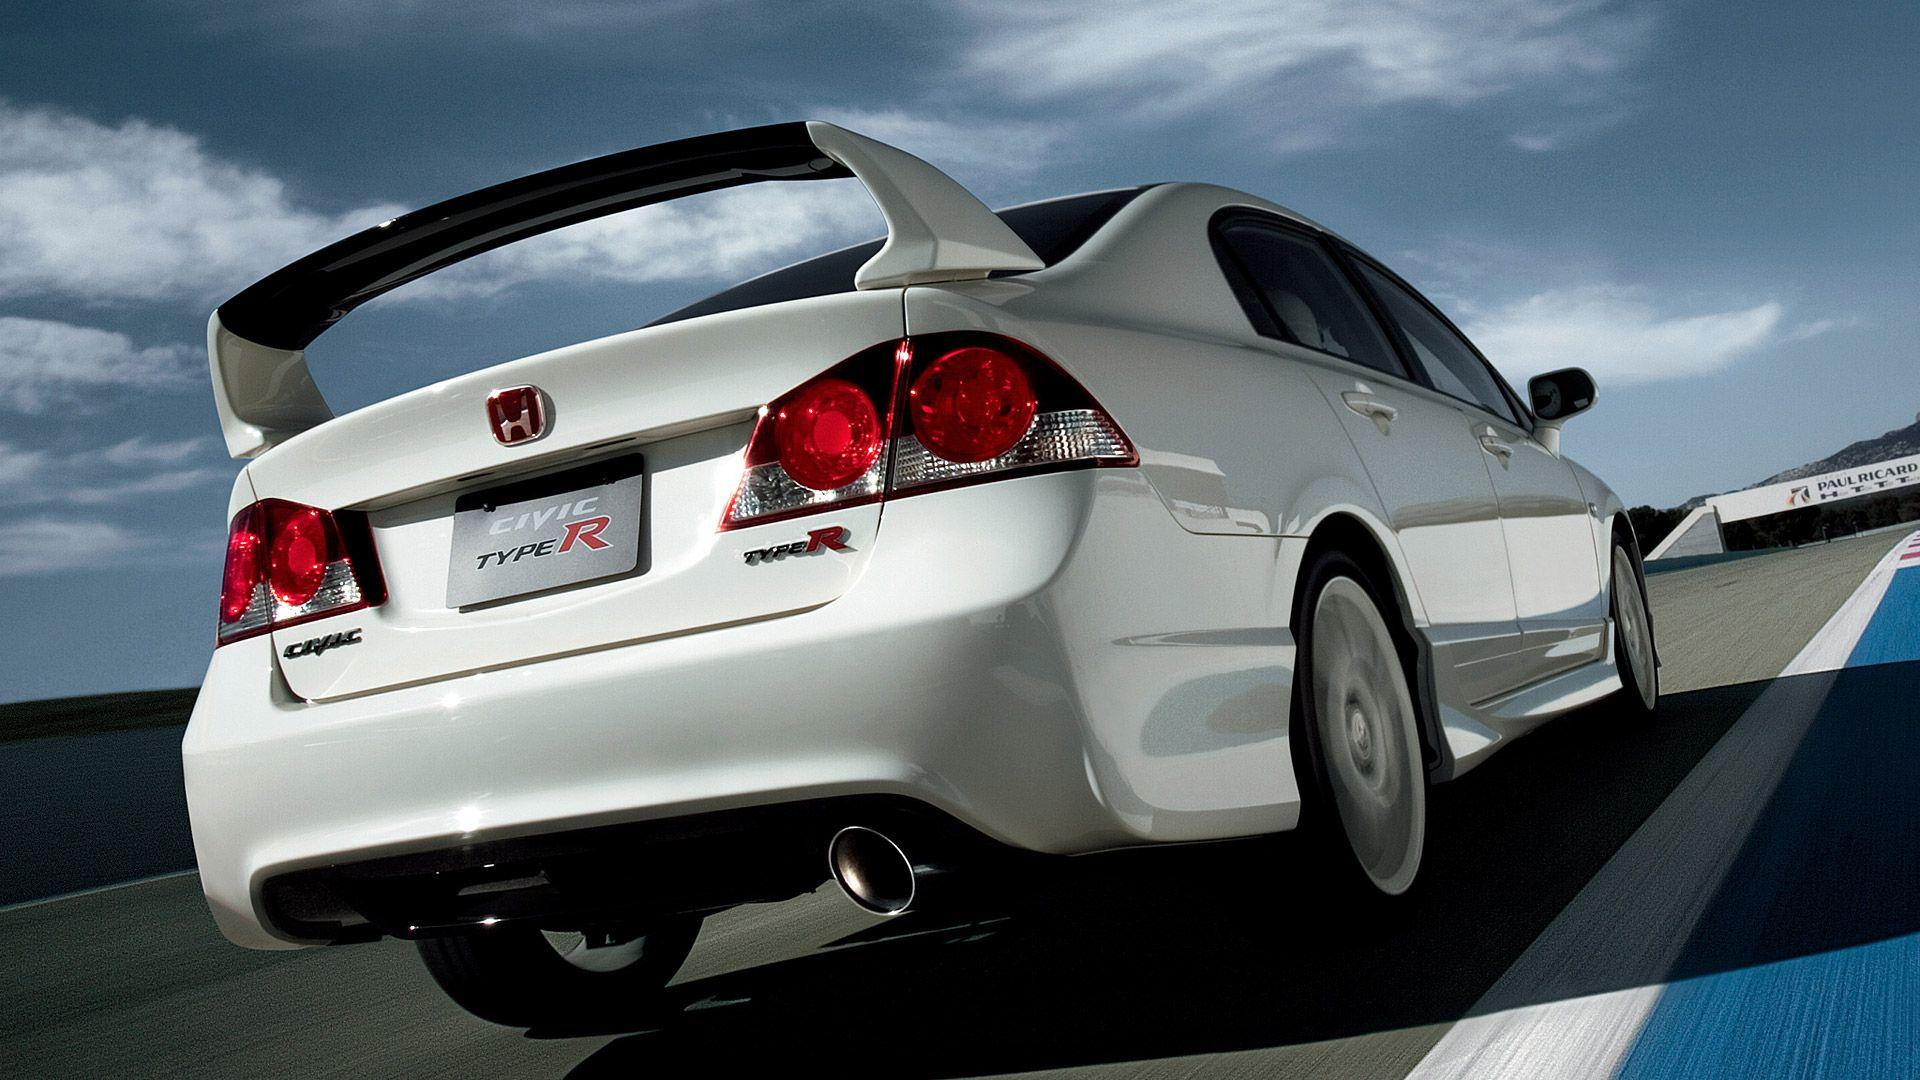 Used 2008 Honda Civic Type-R 2.0M (COE till 11/2027) for Sale (Expired) -  Sgcarmart